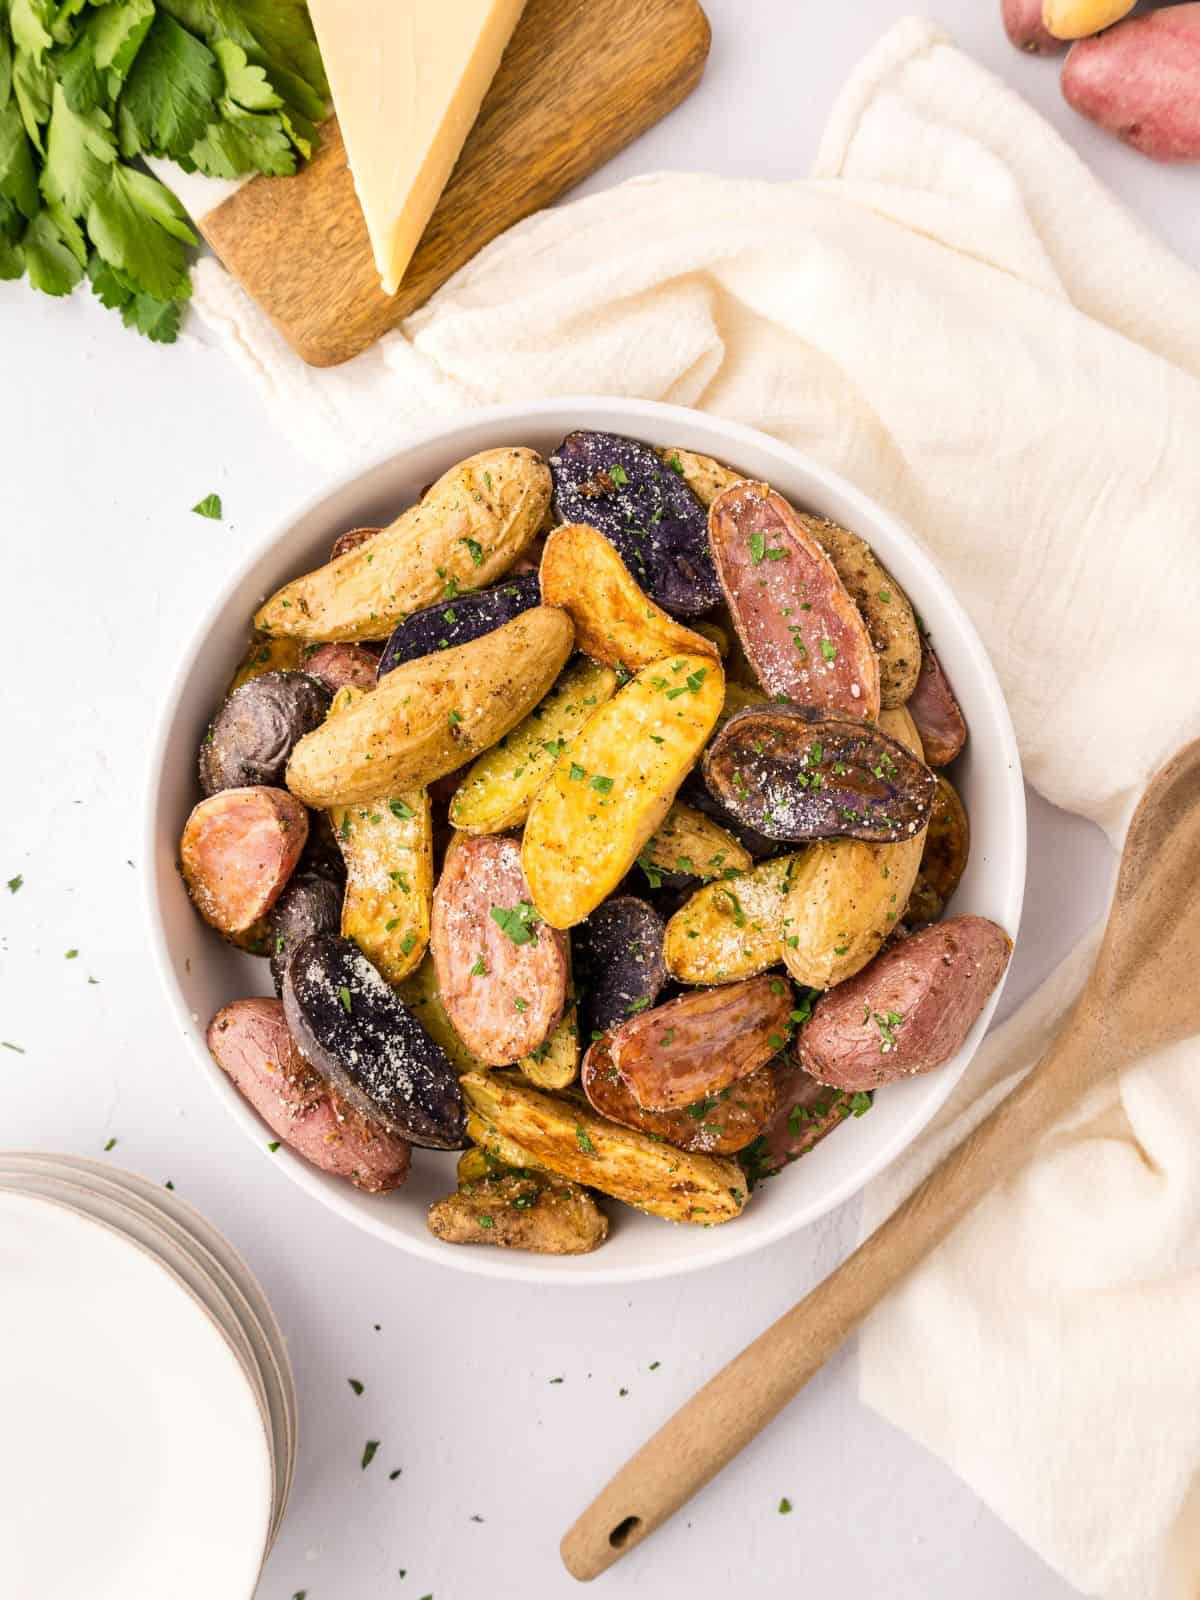 Bowl of fingerling potatoes topped with parmesan and parsley.